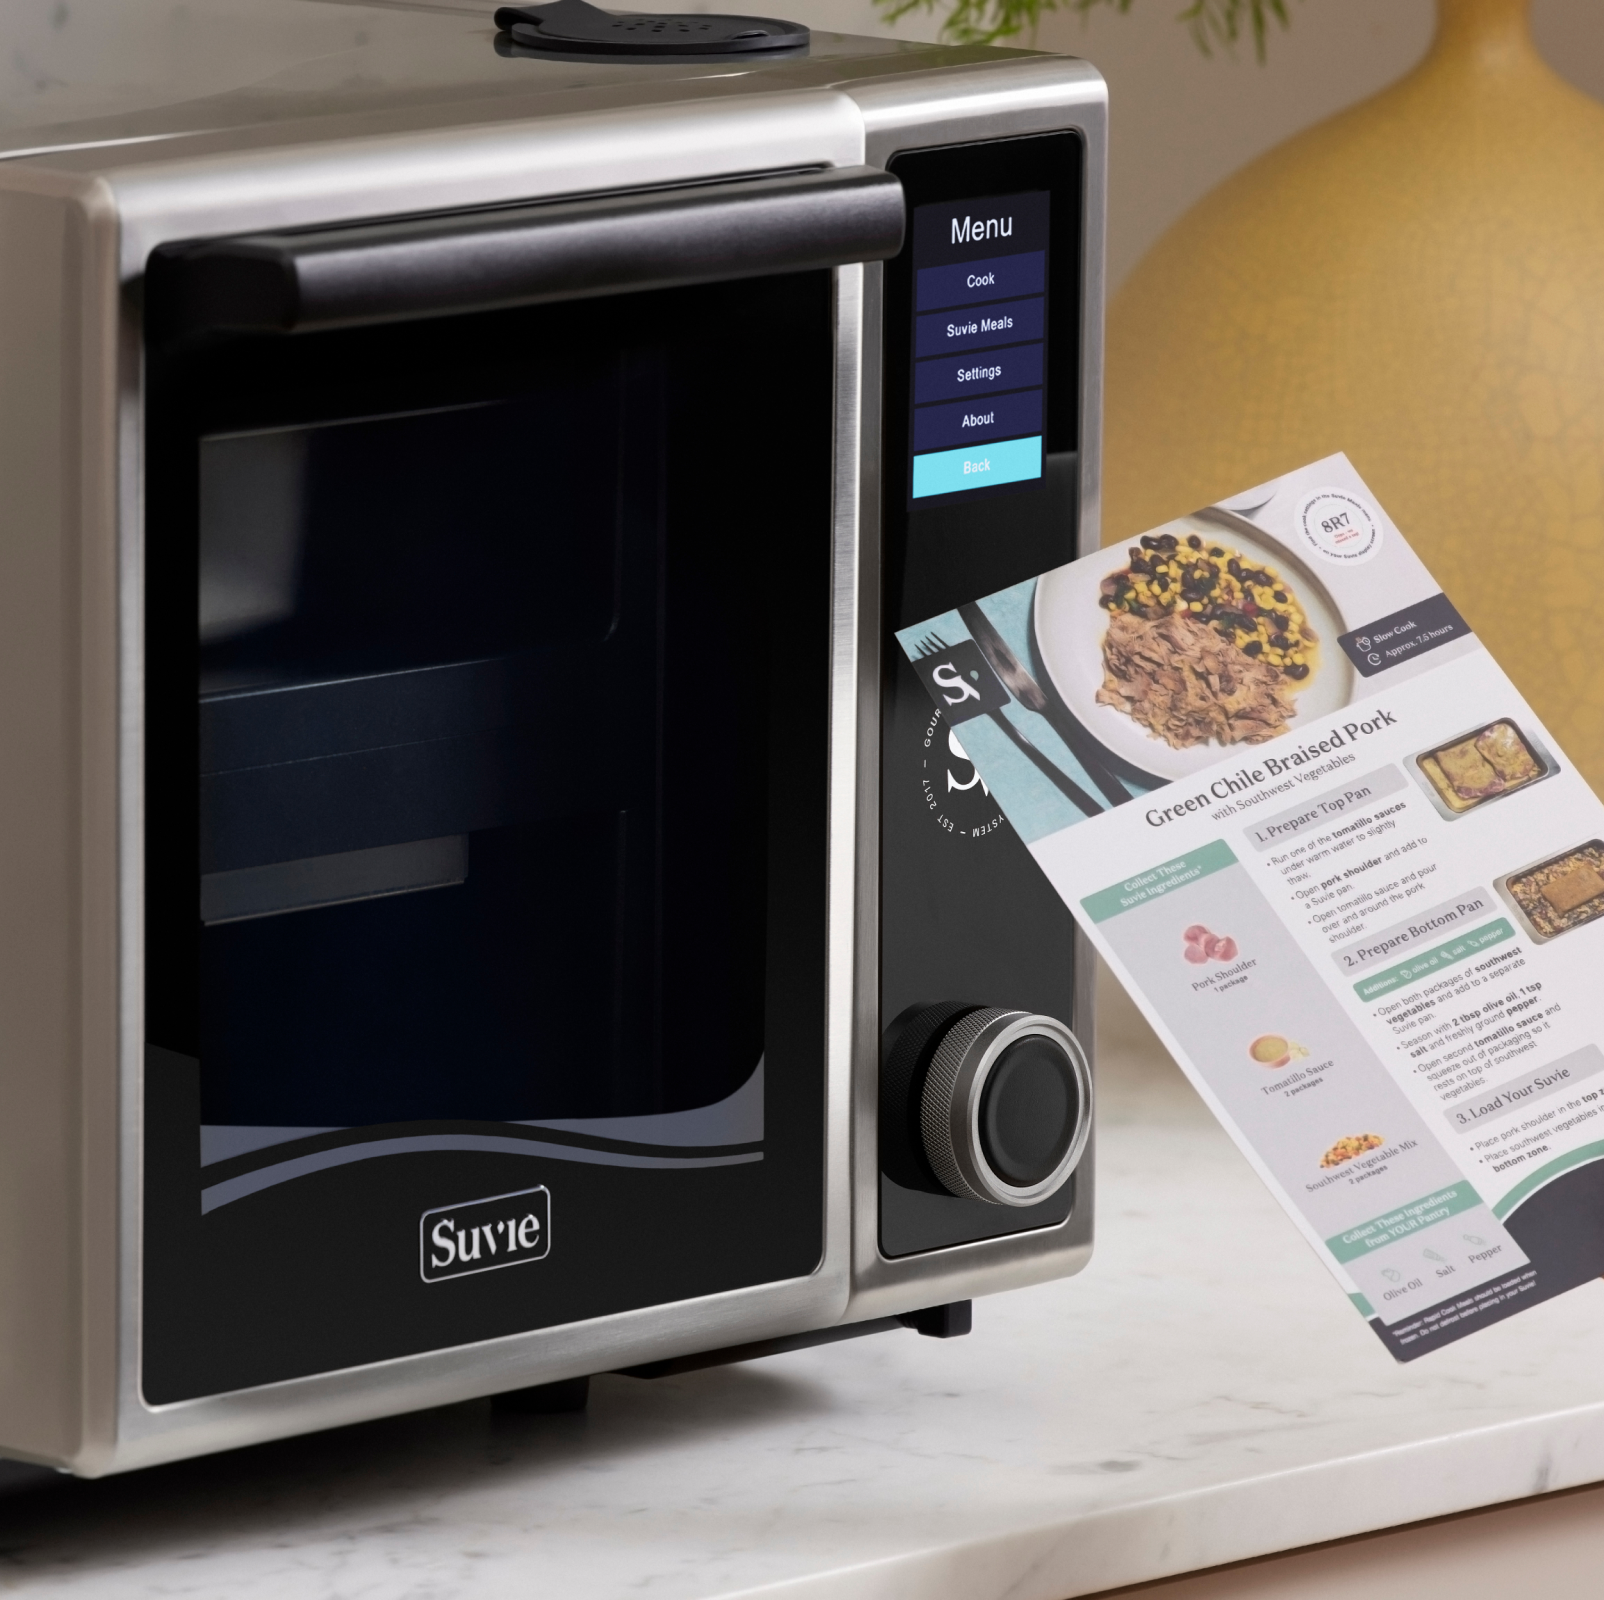 Suvie Kitchen Robot: Wi-Fi countertop oven refrigerates, cooks food - CNET